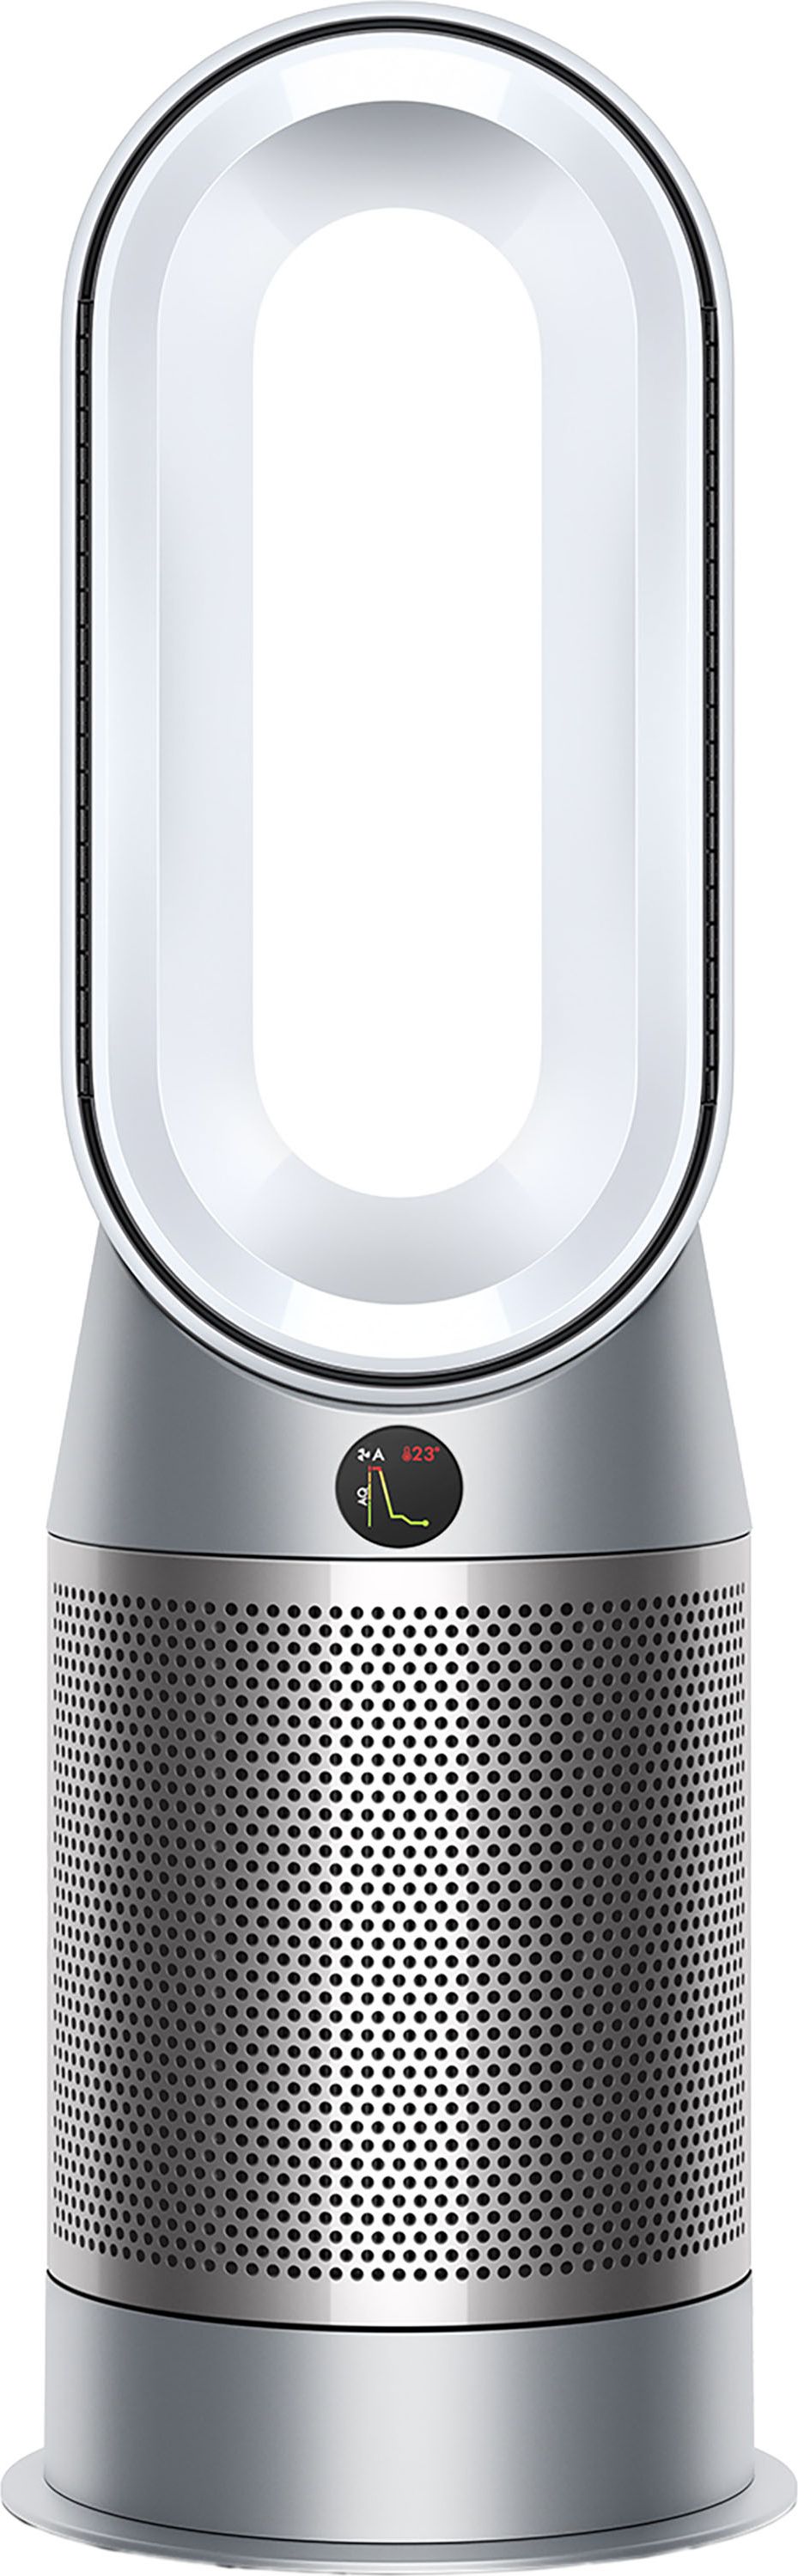 Dyson Hot+Cool Auto React HP7A Air Purifier with Fan Cooling - Silver / White, Silver